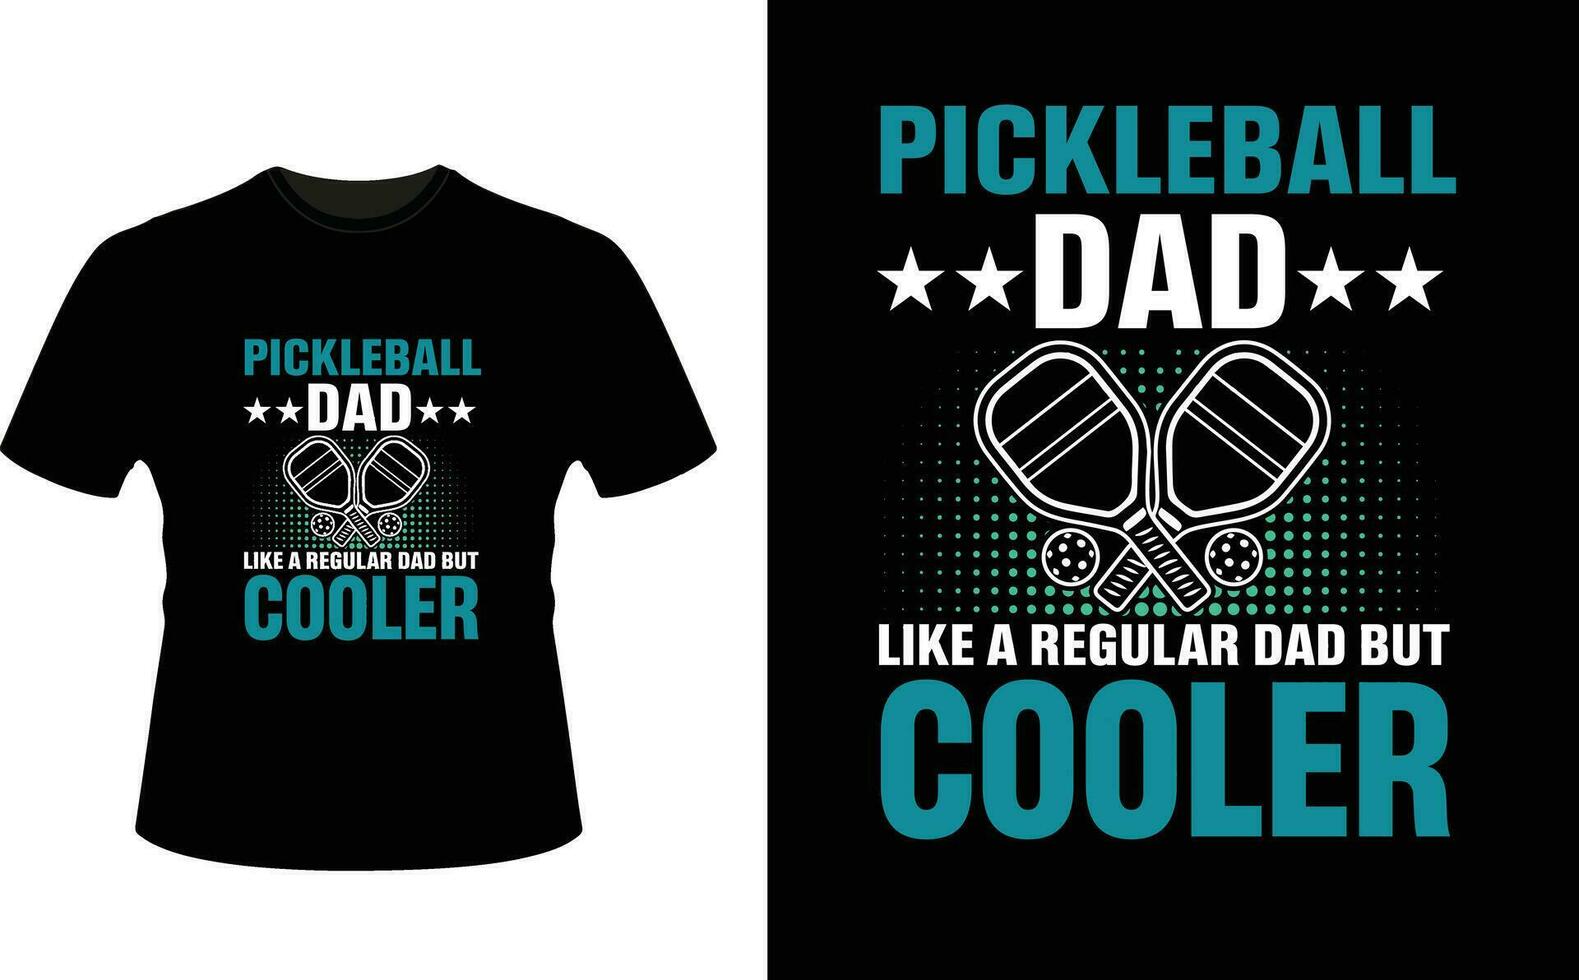 Pickleball Dad Like a Regular Dad But Cooler or dad papa tshirt design or Father day t shirt Design vector